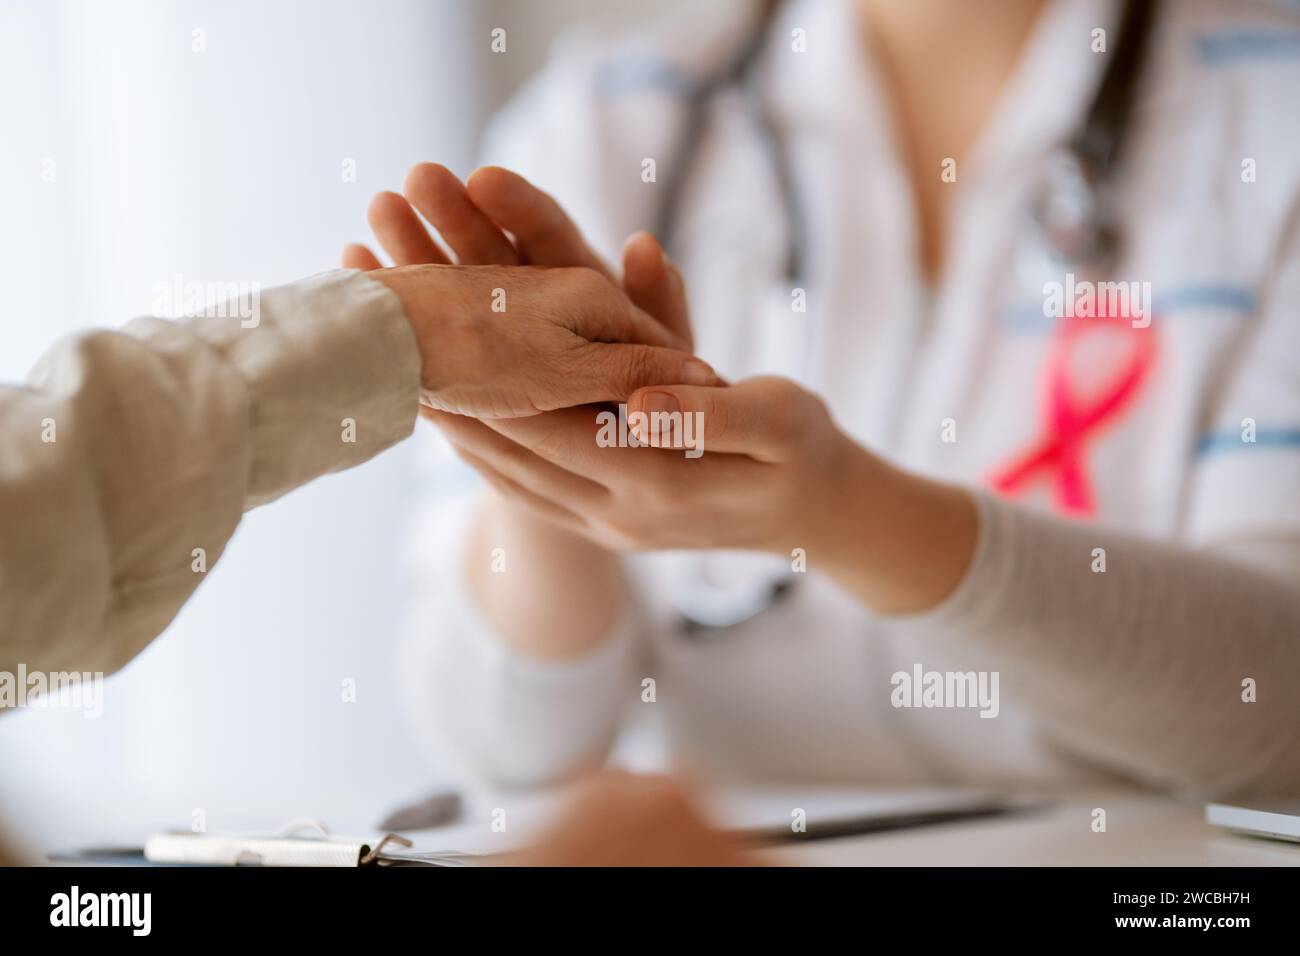 Pink ribbon for breast cancer awareness. Female patient listening to doctor in medical office. Support people living with tumor illness. Stock Photo